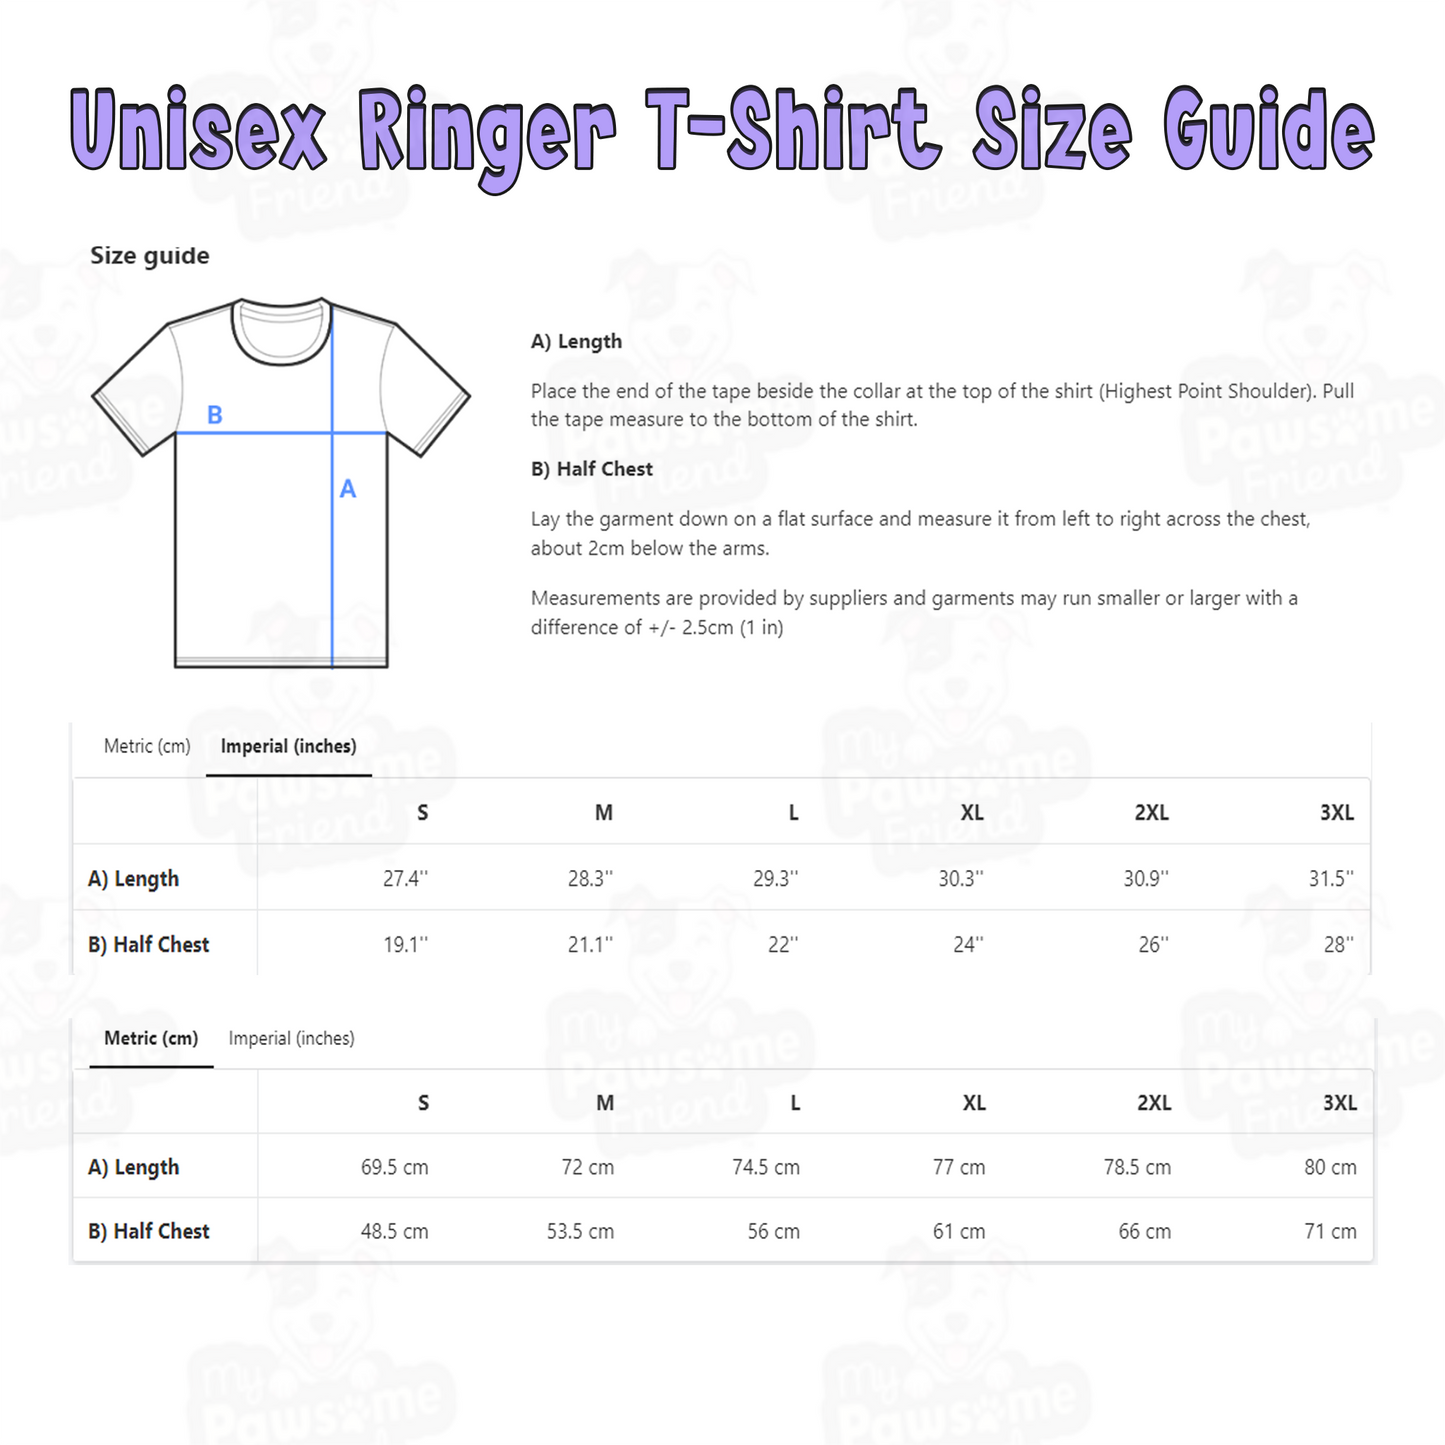 T shirt size guide for a Ringer Unisex t shirt with a cute design featuring a french bulldog smiling surrounded by heart designs, and the phrase "I love my Frenchie"